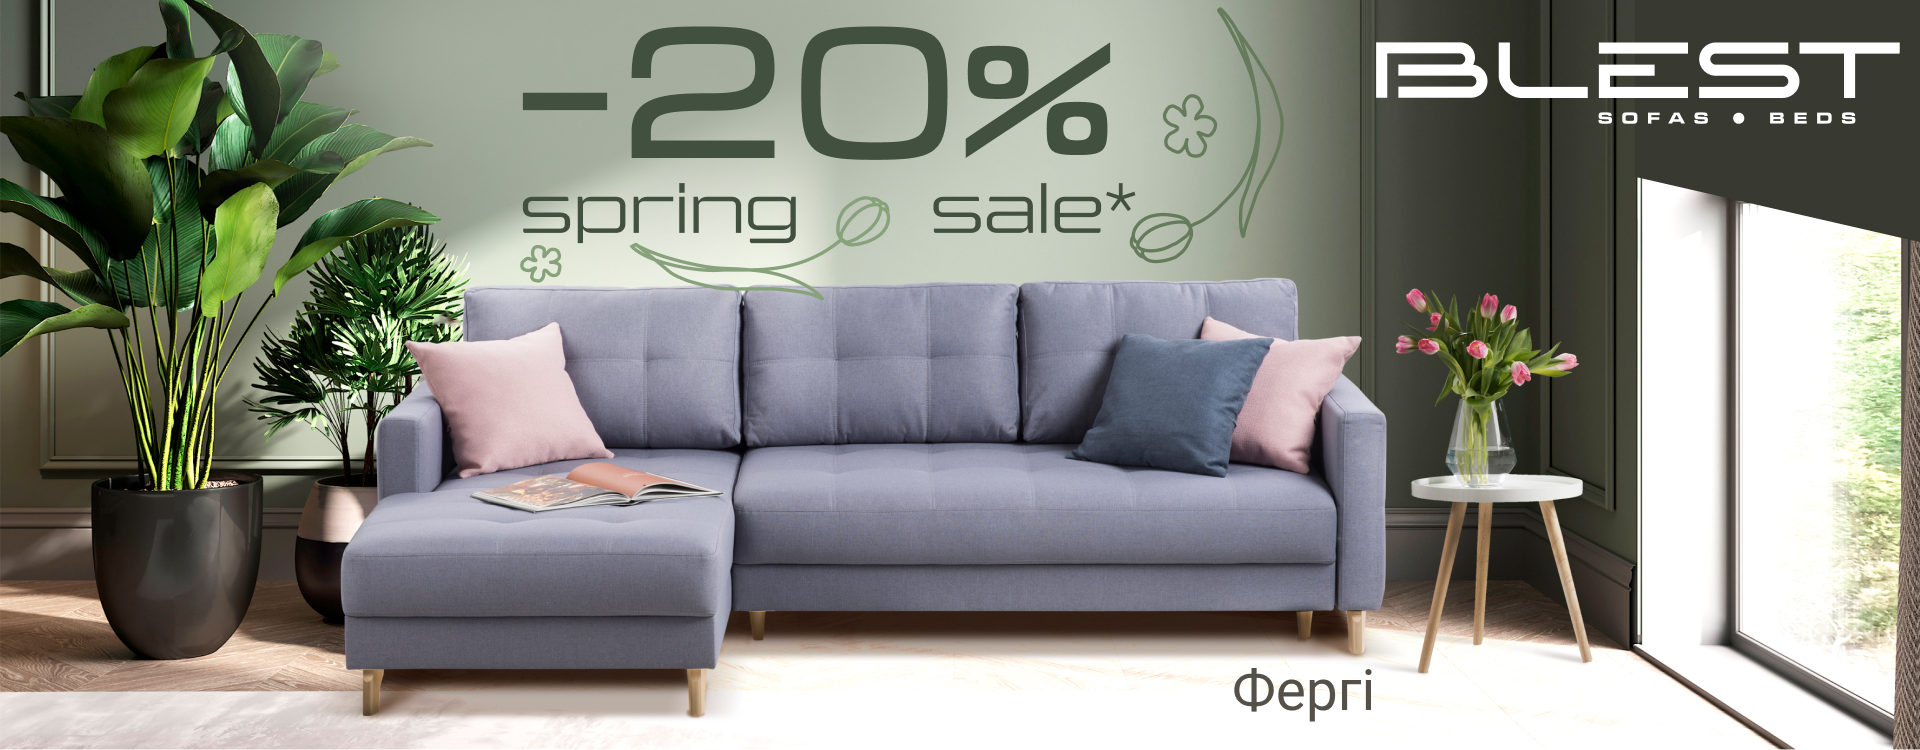 Spring discounts up to -20% at BLEST